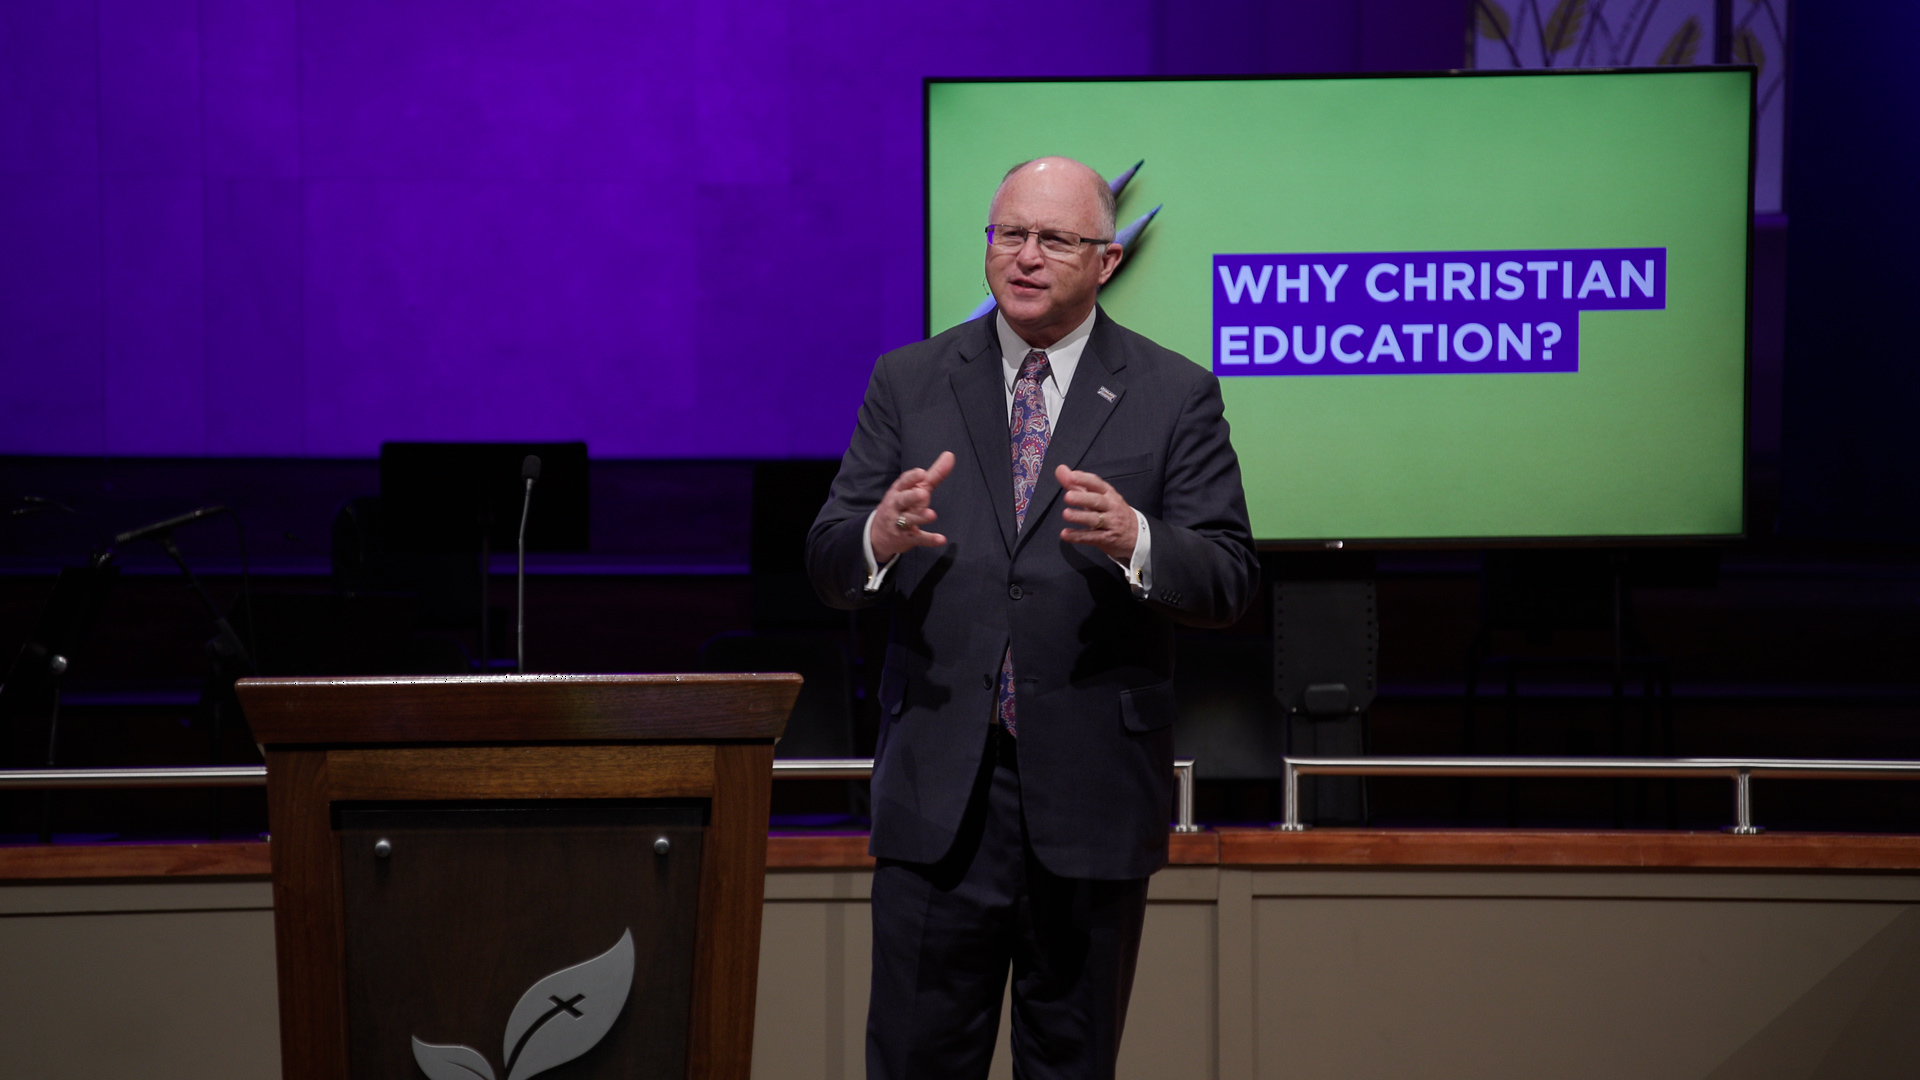 Pastor Paul Chappell: Why Christian Education?